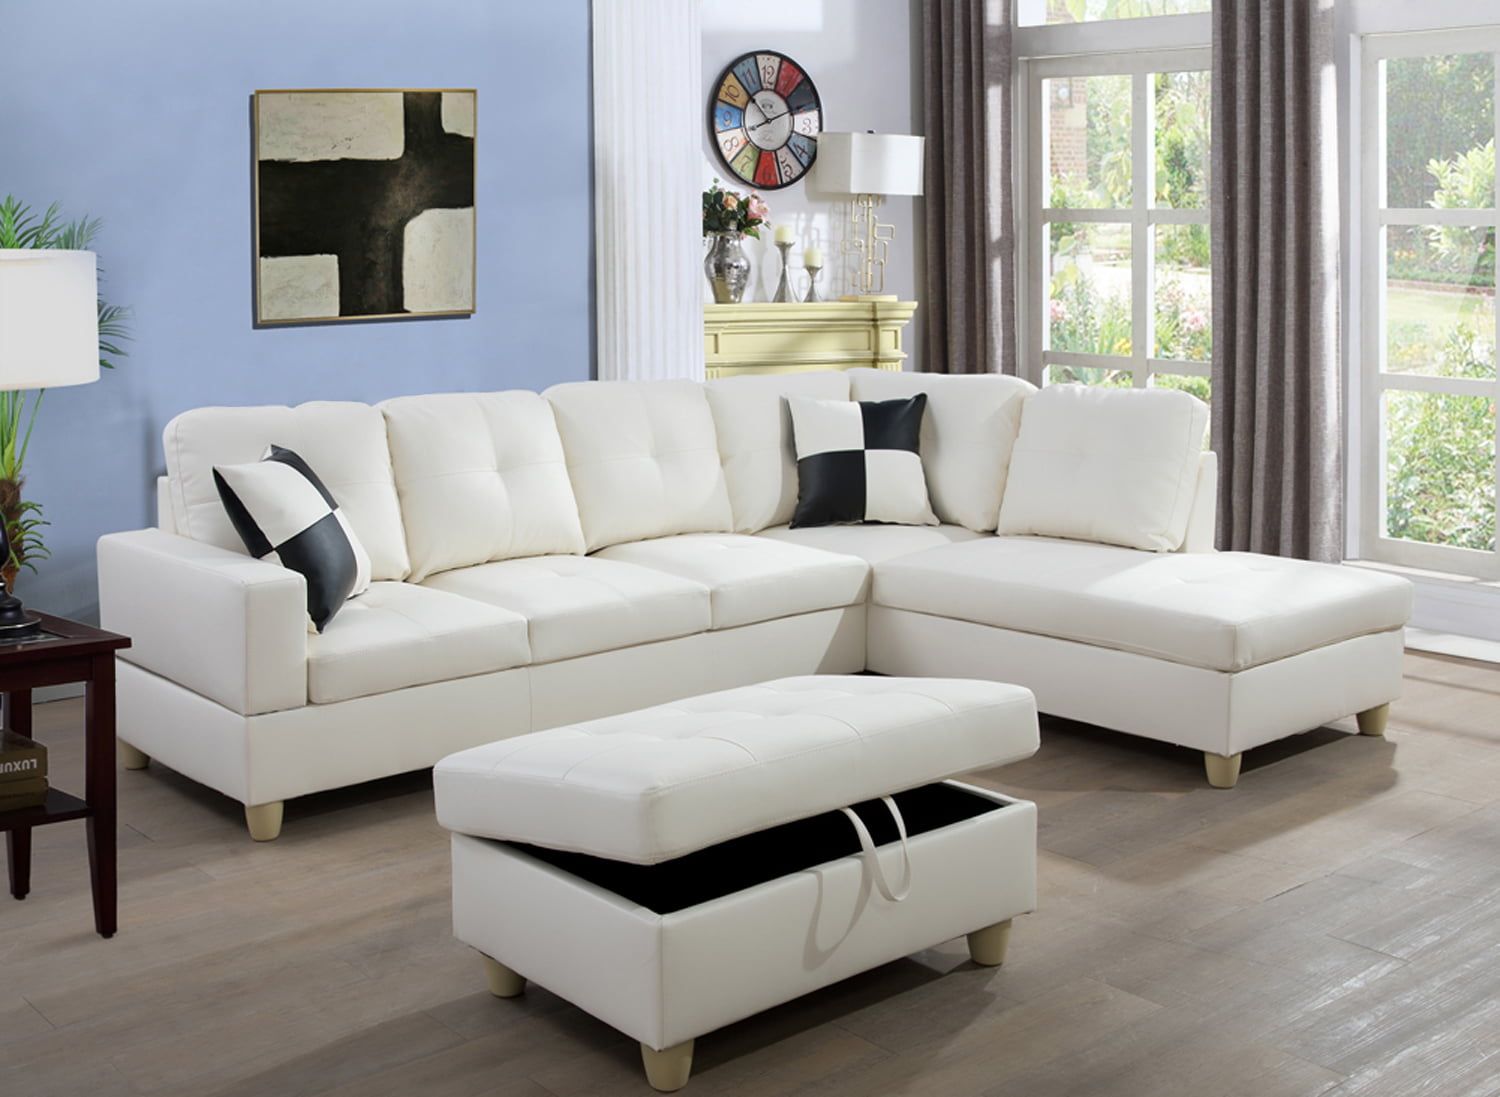 Ainehome Faux Leather Sectional Set, Living Room L Shaped Modern Sofa With Sofas With Ottomans (View 9 of 20)